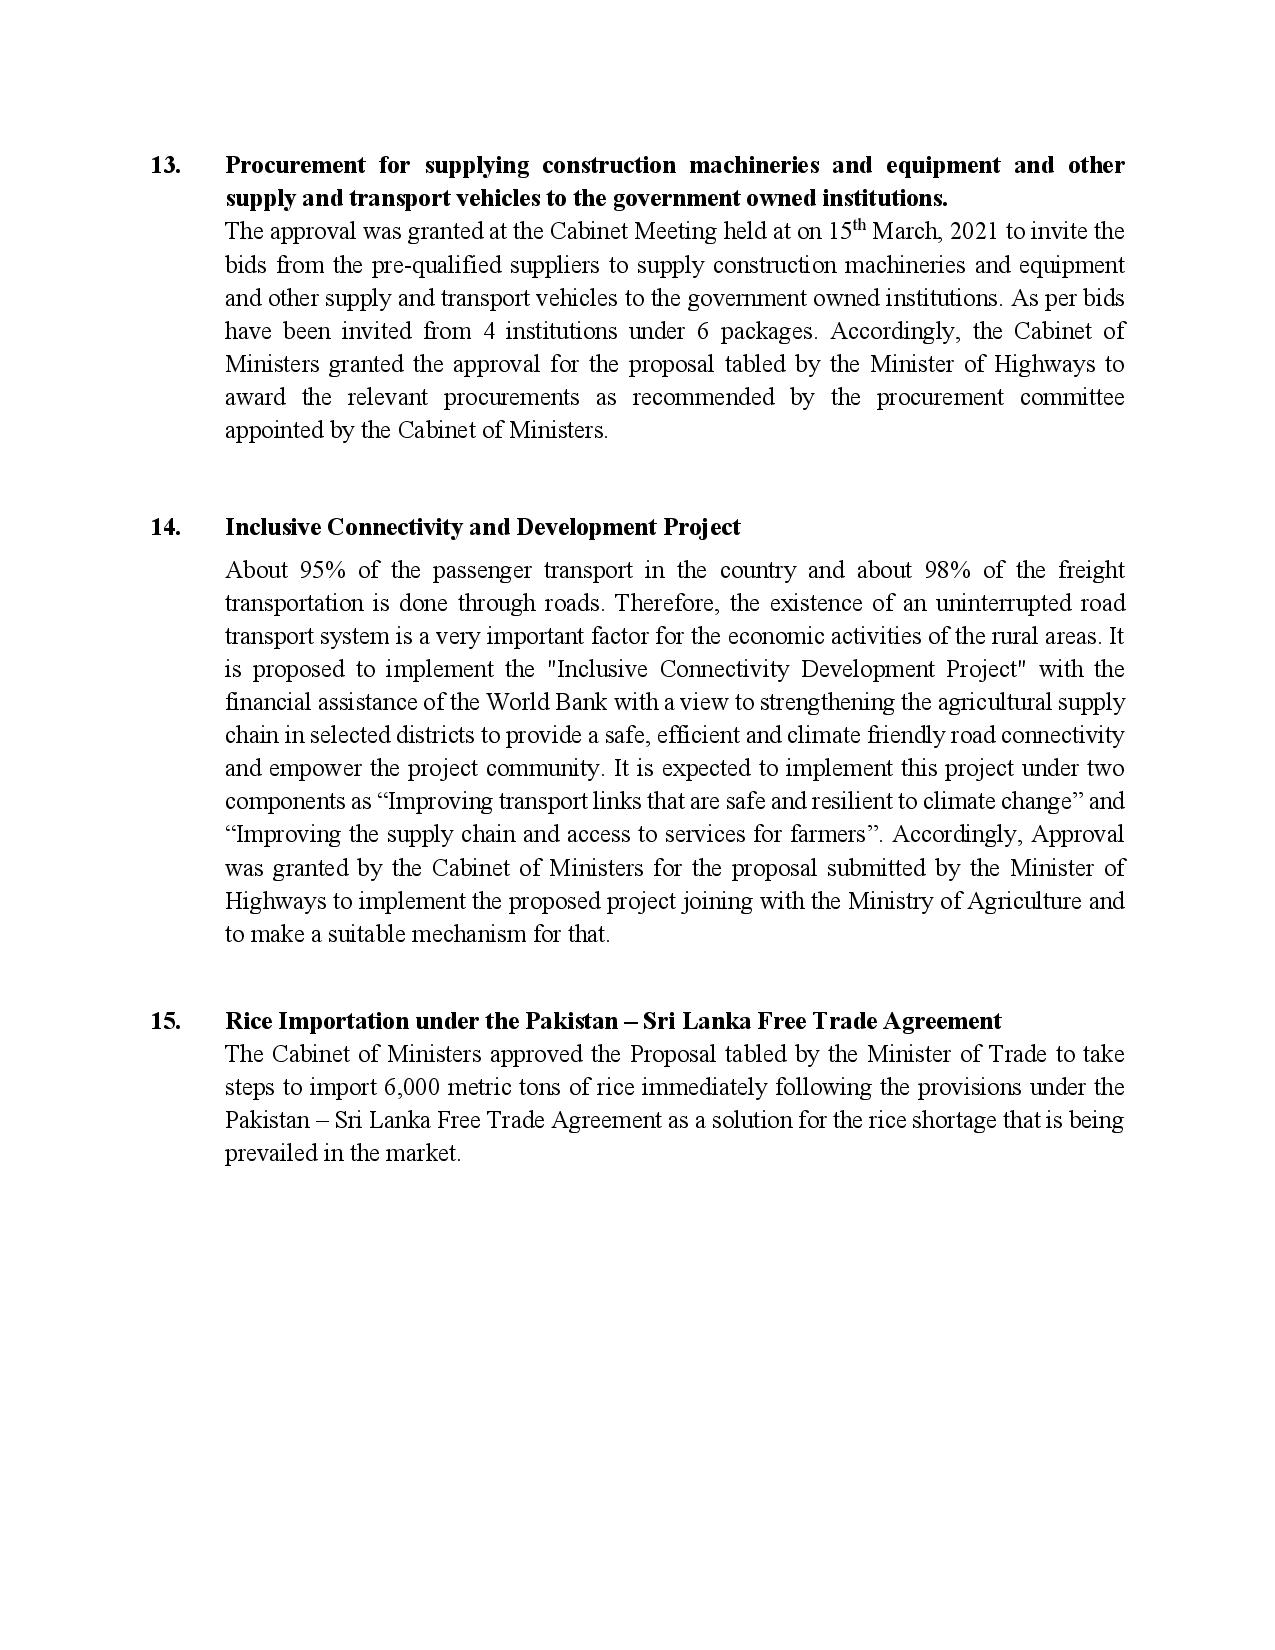 Cabinet Decisions on 17.08.2021 English page 005